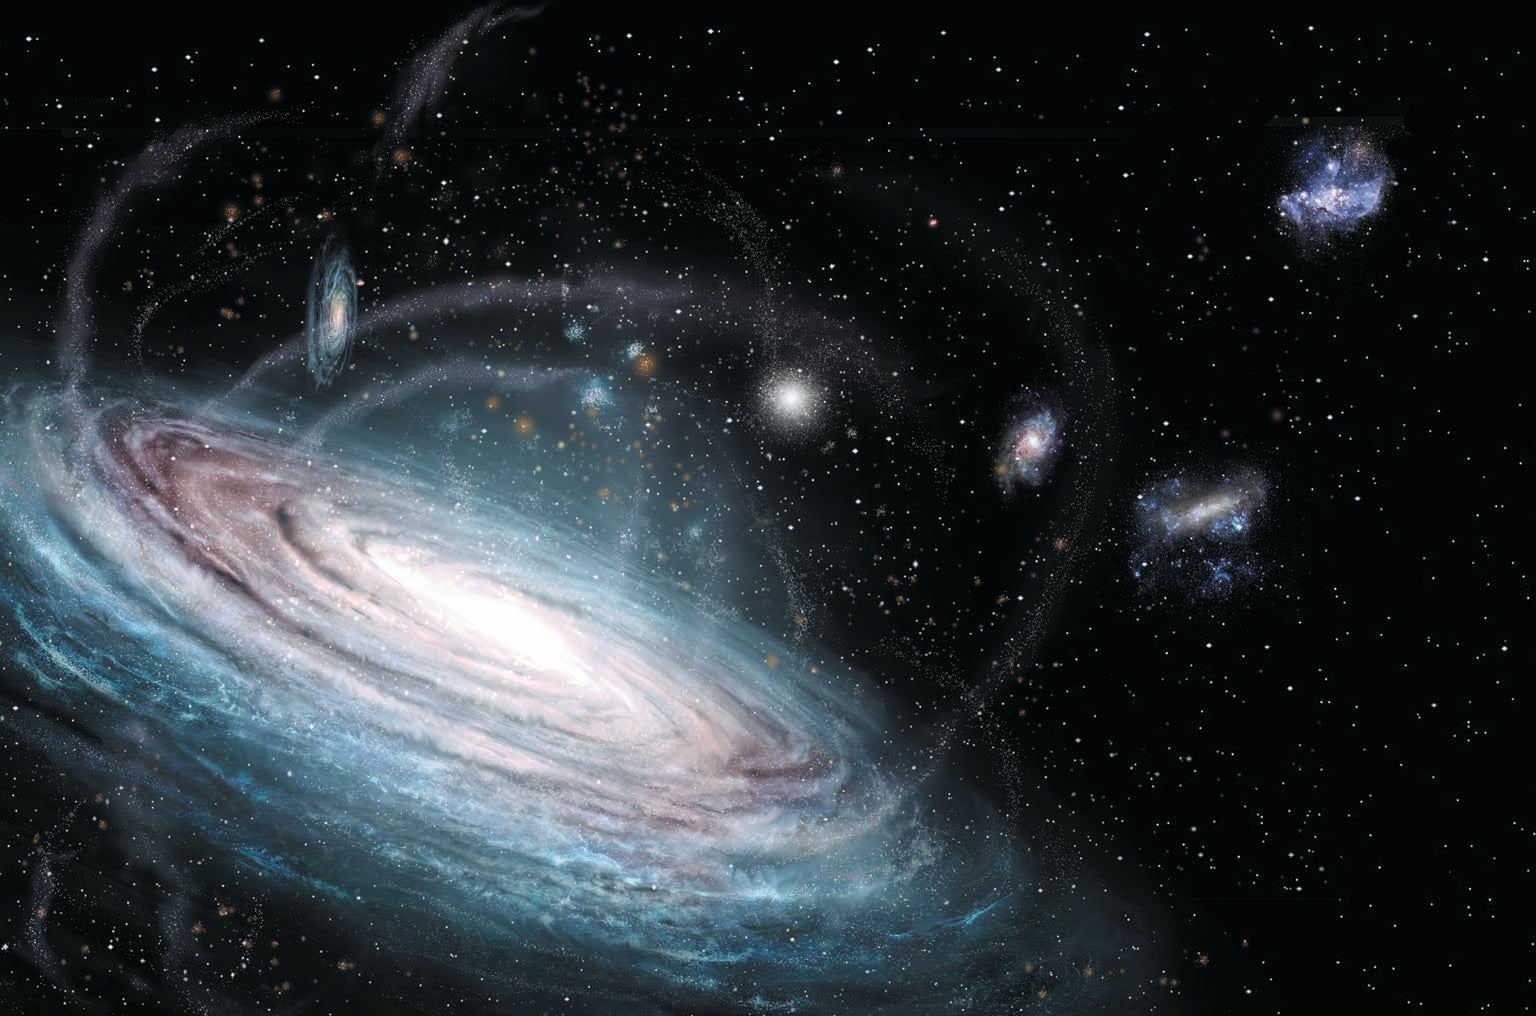 An illustration of a galaxy.